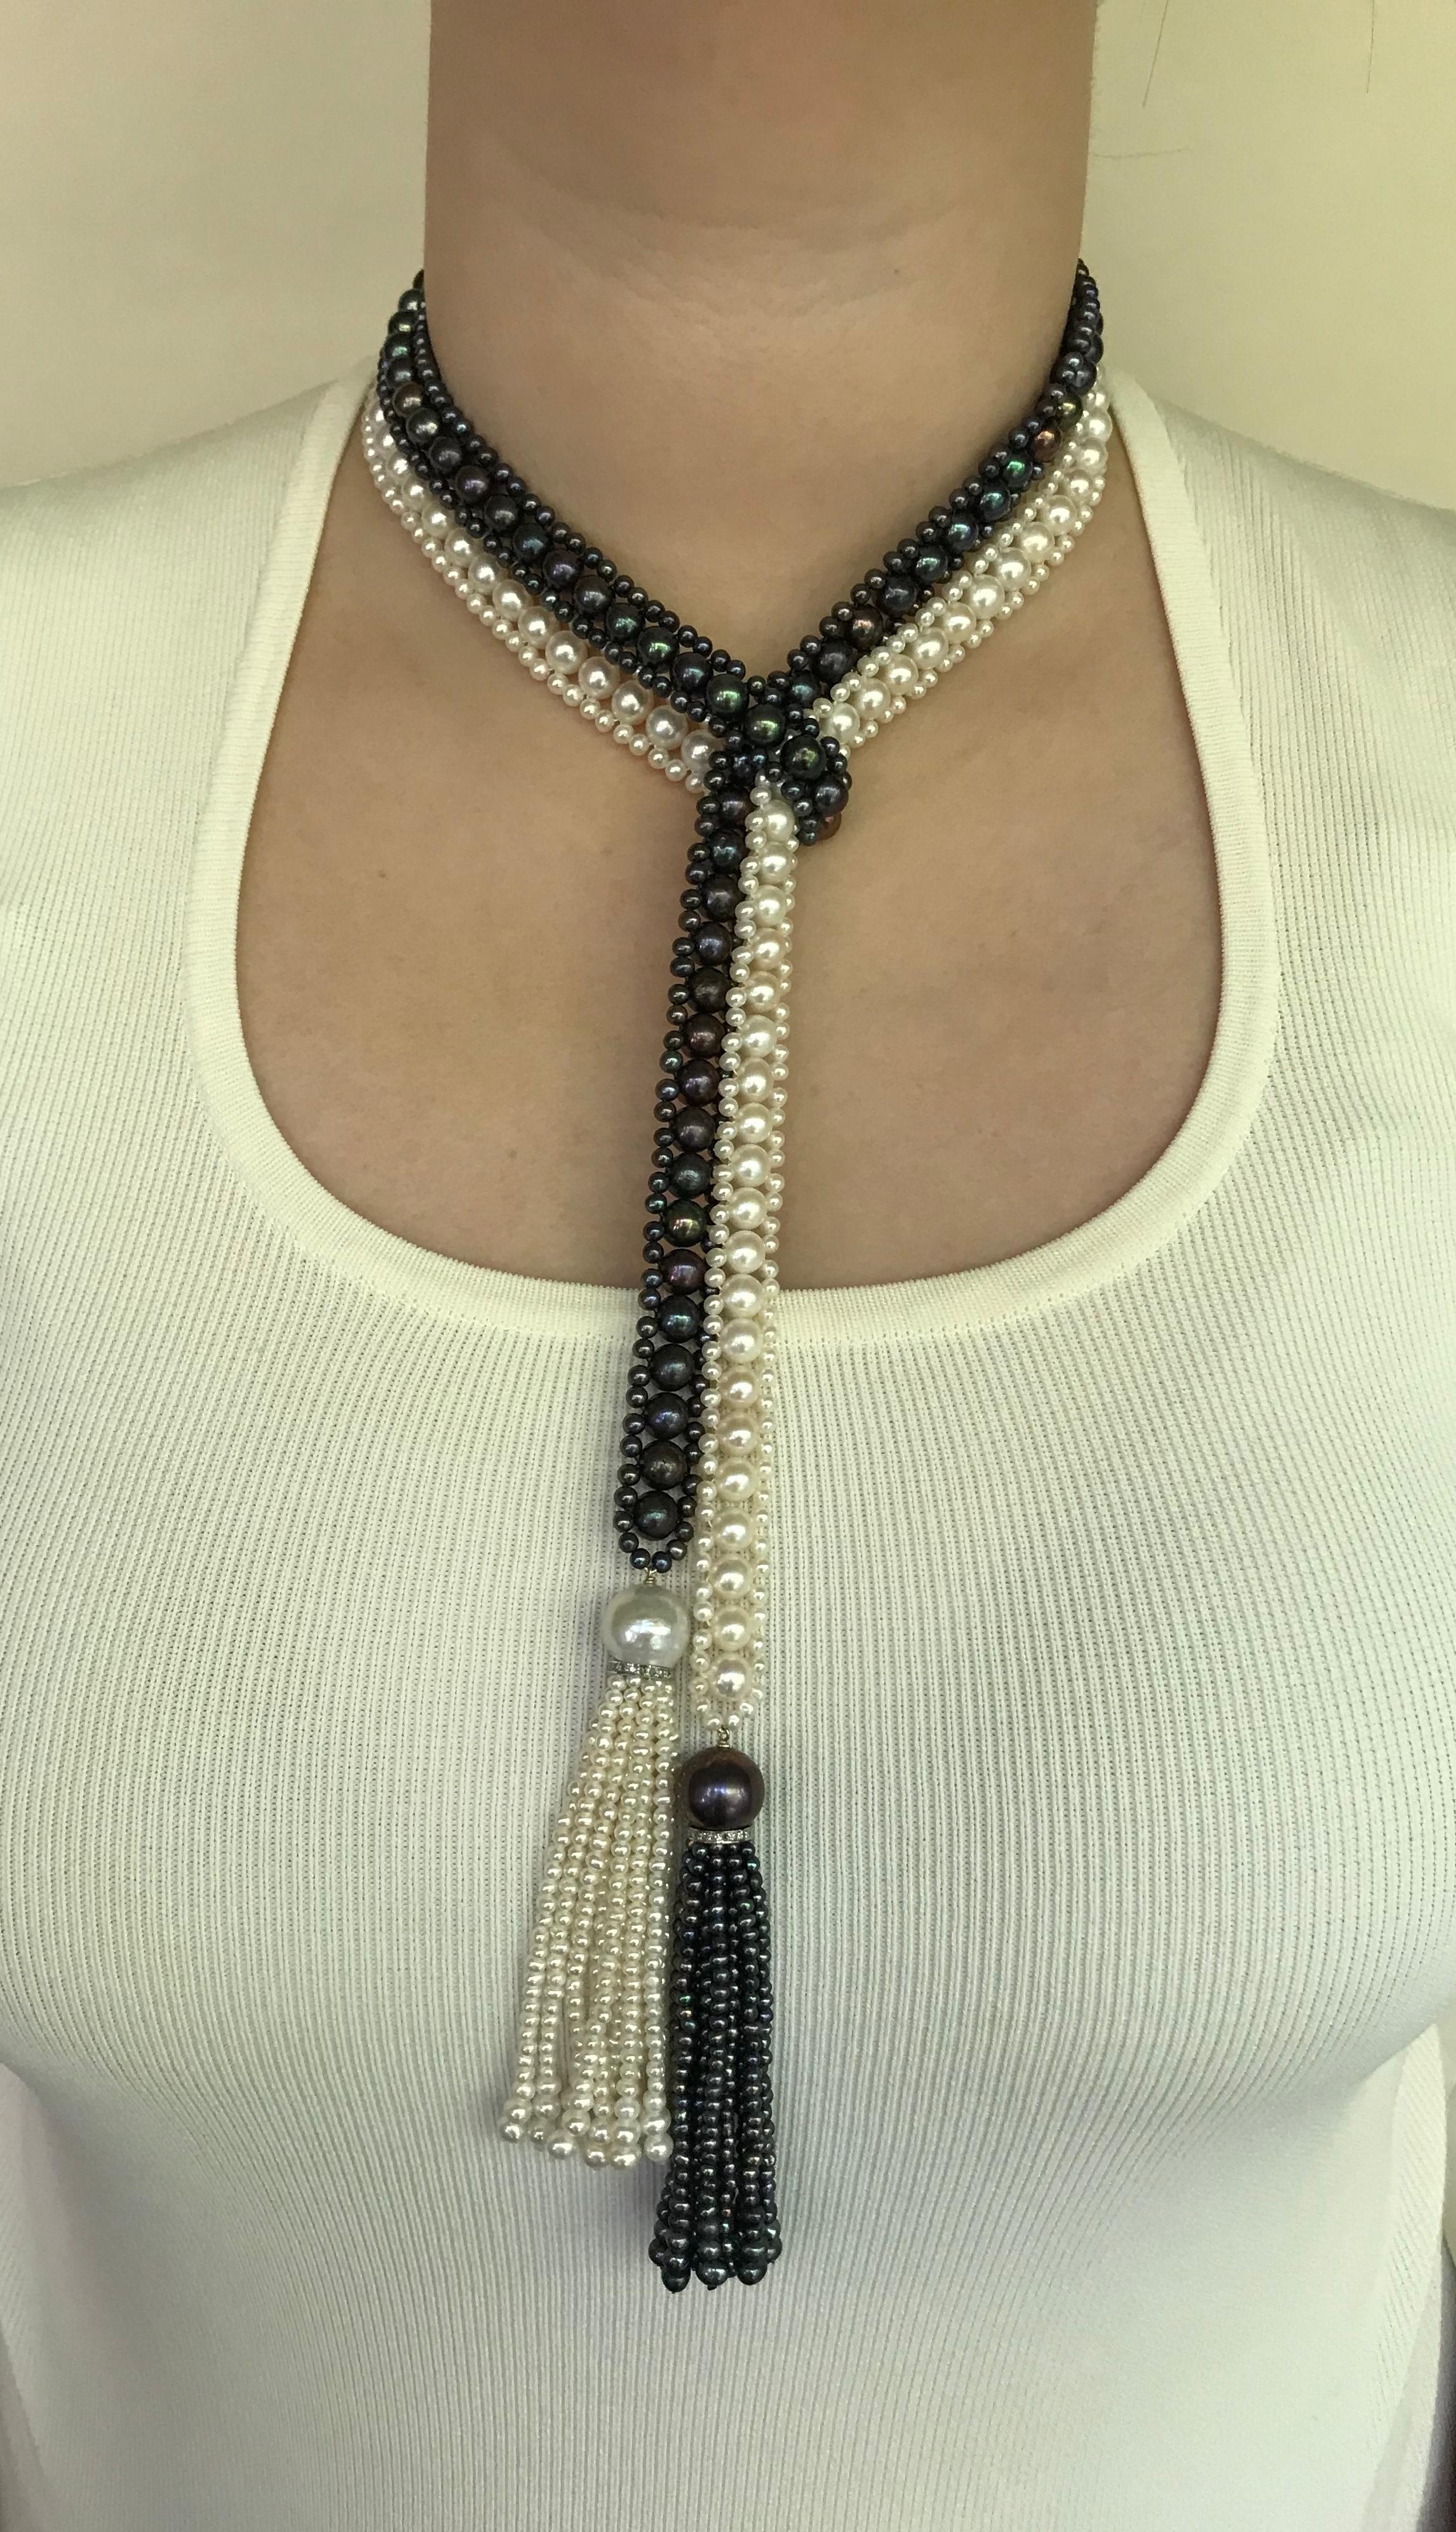 Marina J. Long Woven Black and White Pearl Sautoir Necklace in Art Deco Style 1